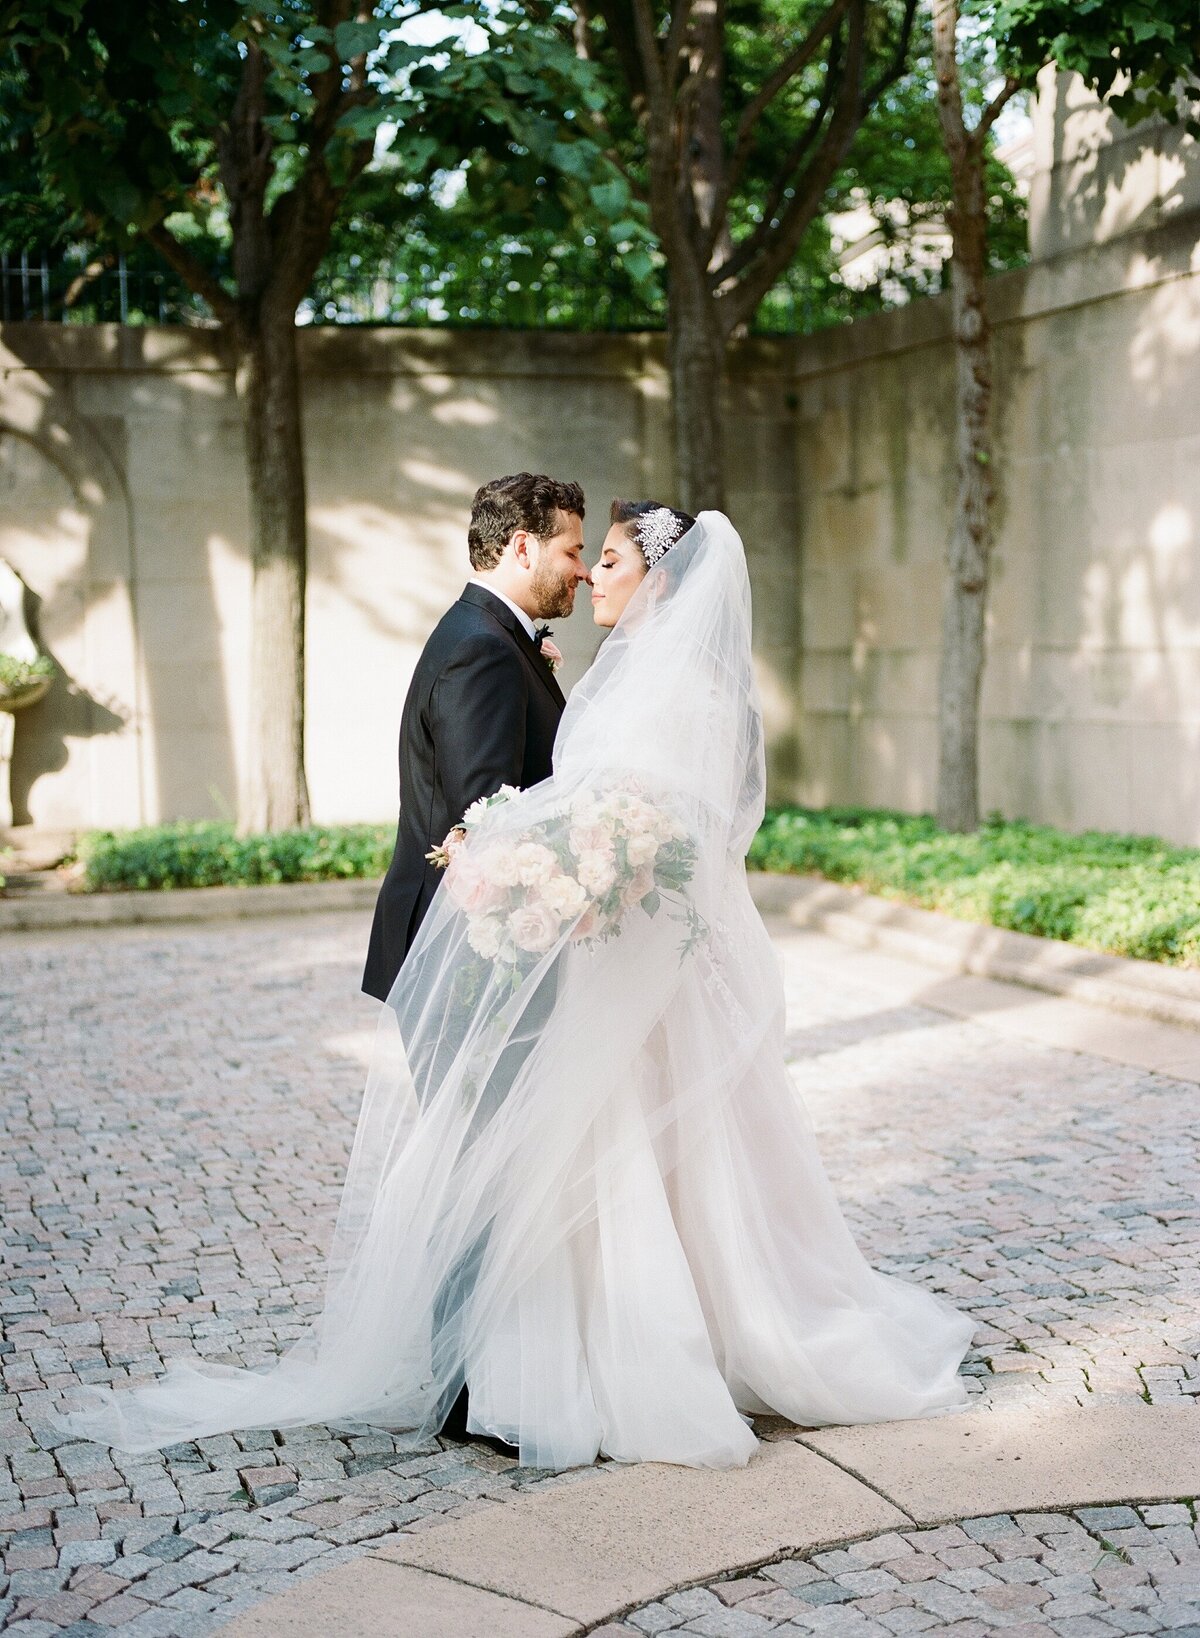 Bride and groom embracing outside of wedding venue